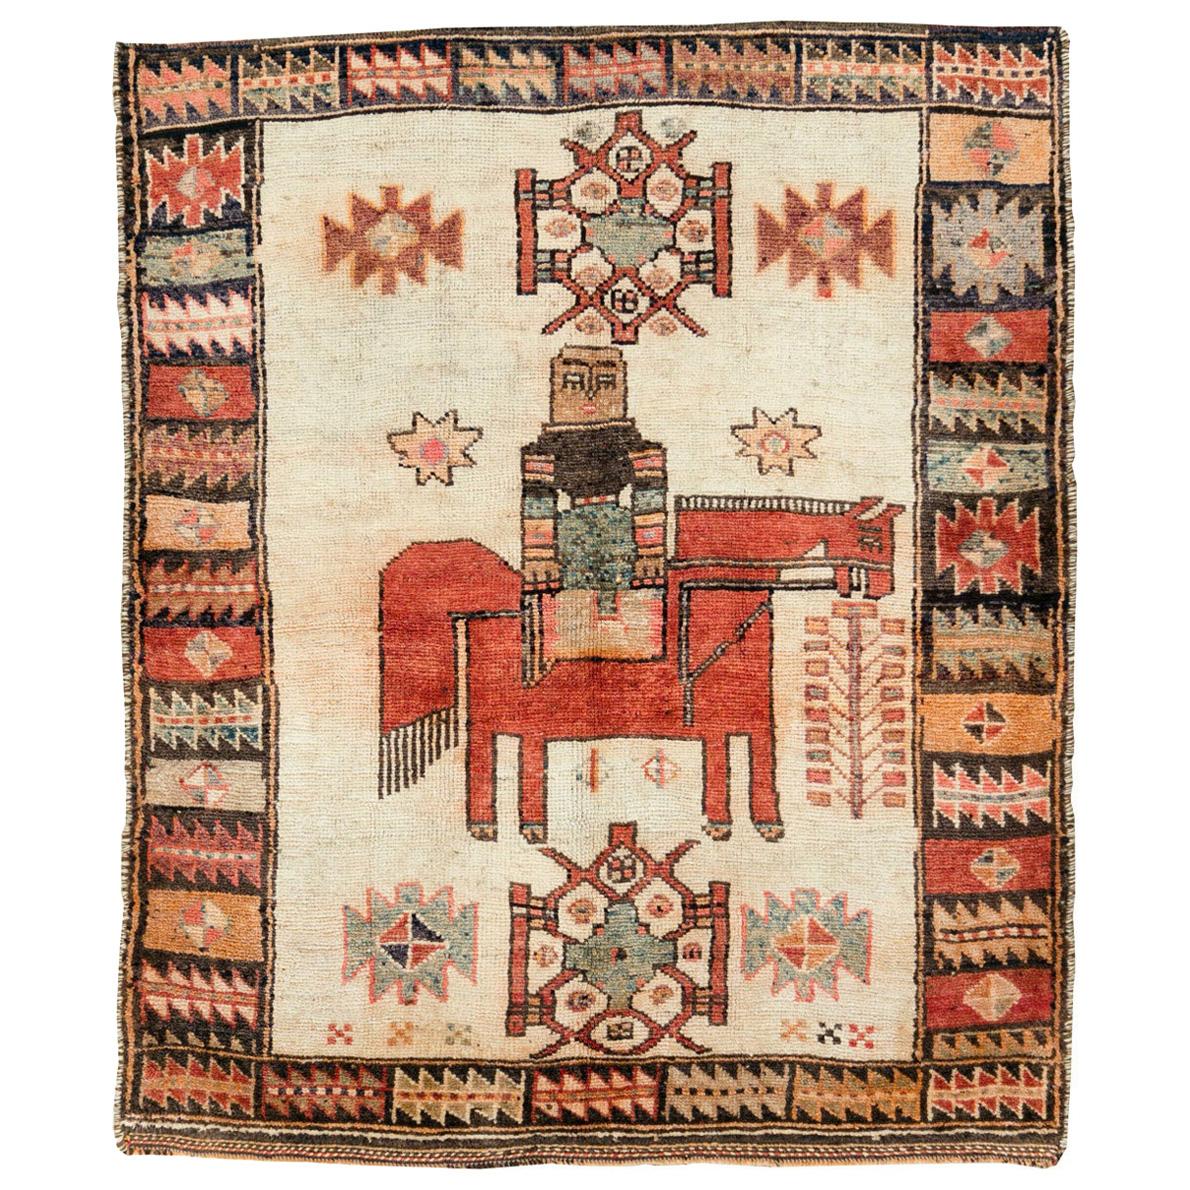 Tribal Mid-20th Century Handmade Persian Bakhtiari Pictorial Square Accent Rug For Sale